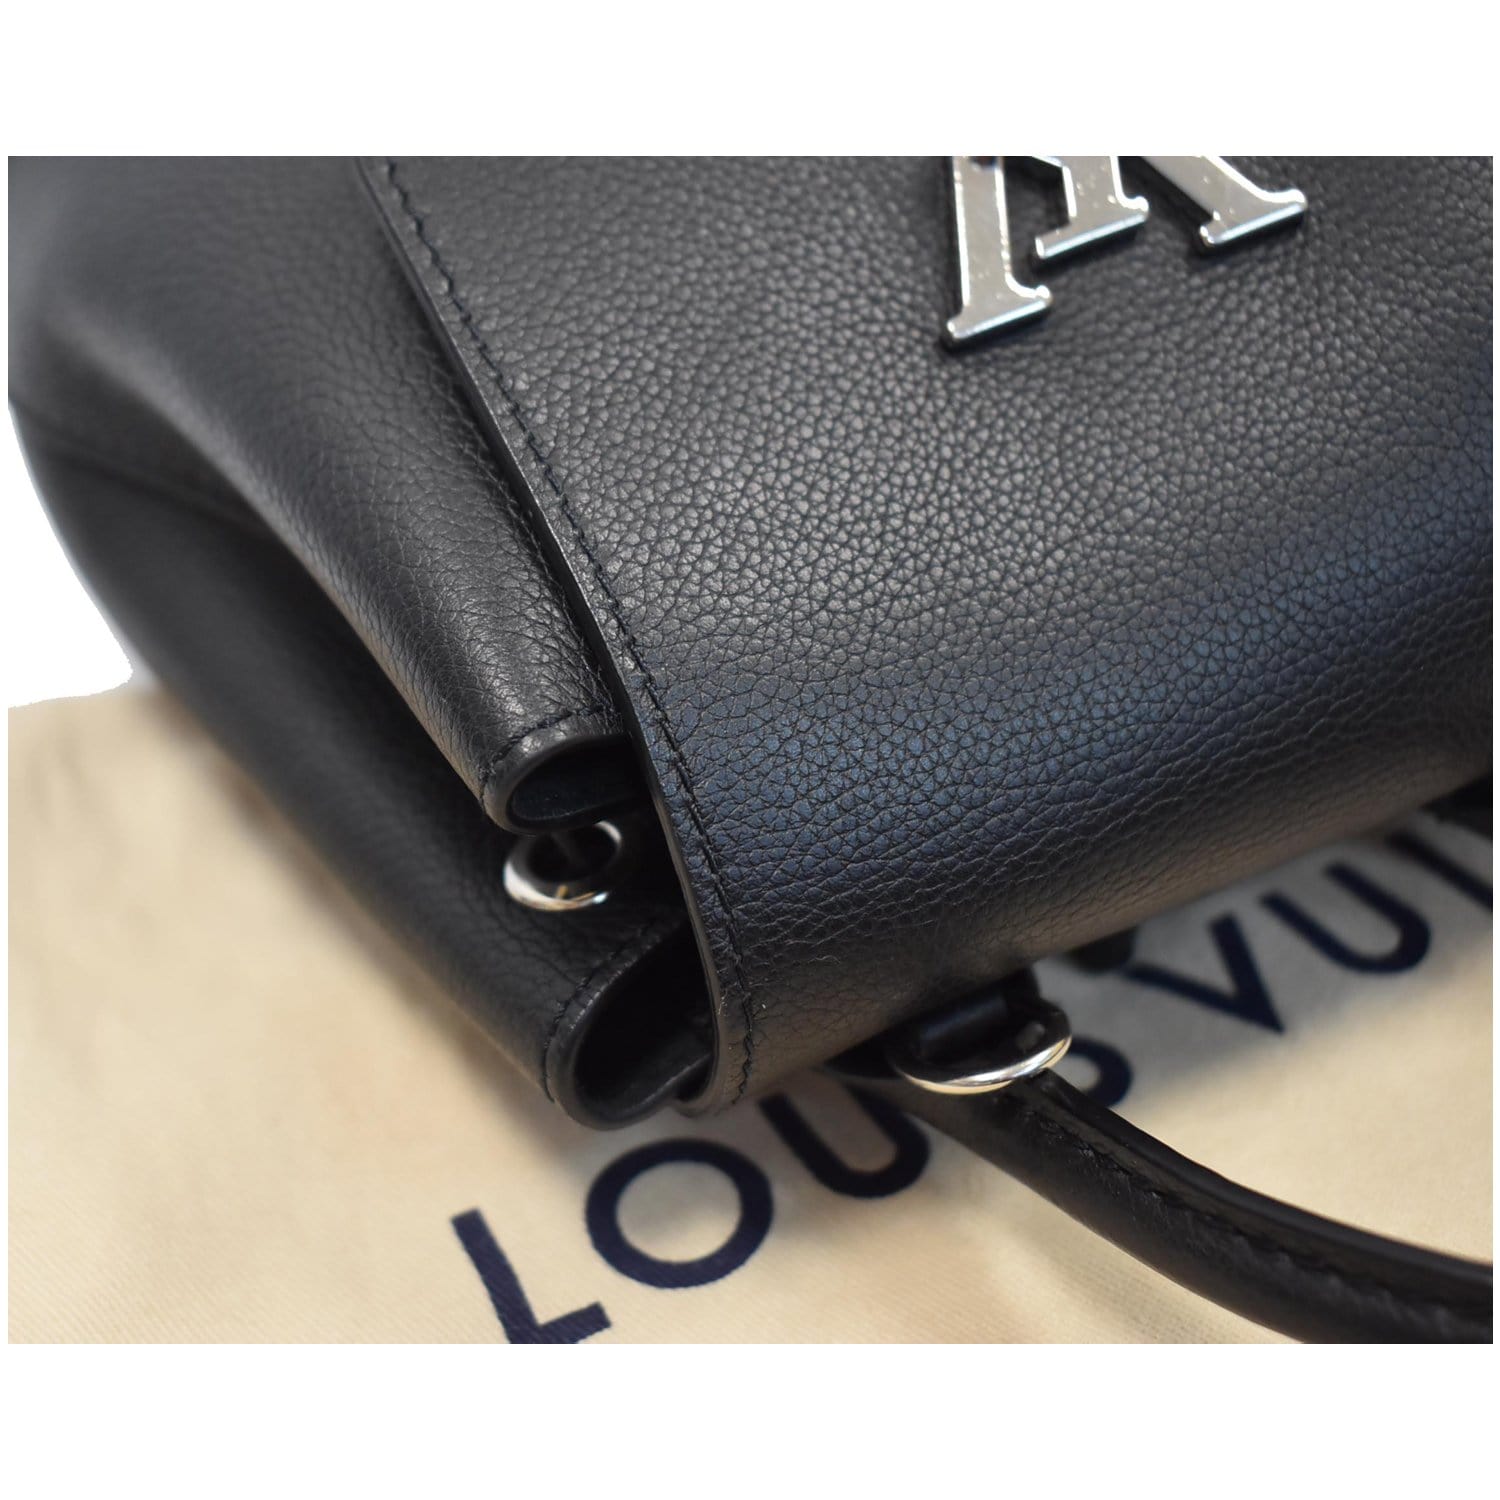 Louis Vuitton Lockme Backpack Backpack in Black Leather Louis Vuitton